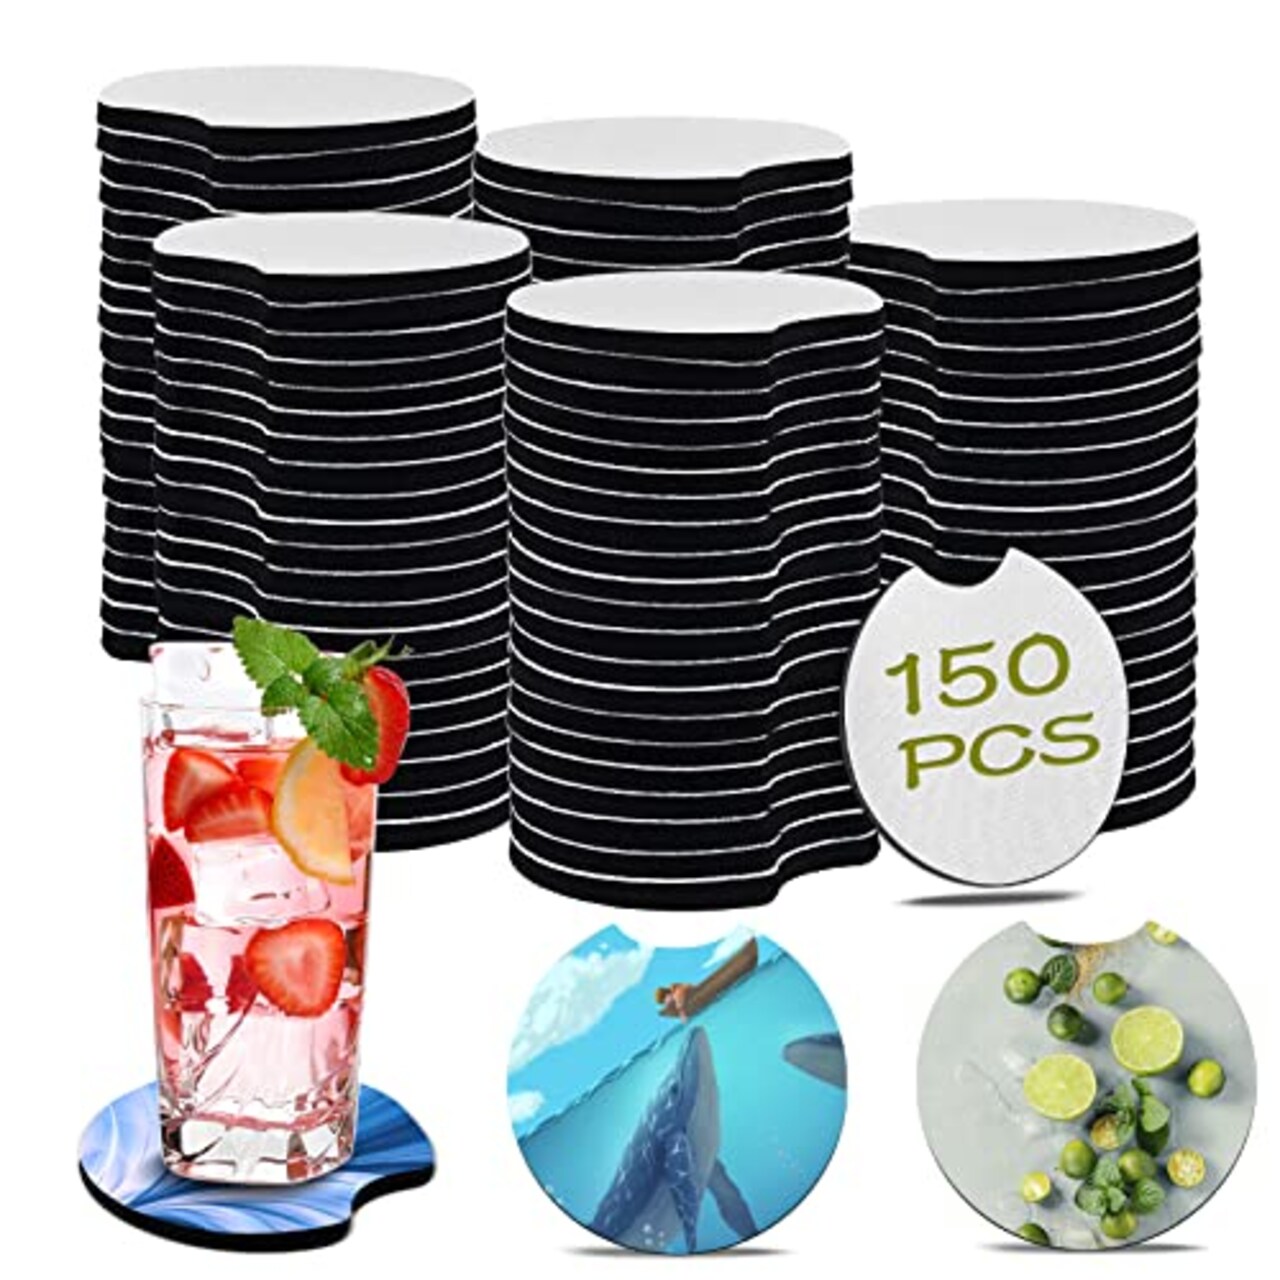 150 PCS Sublimation Blank Car Coasters, 2.75 in Circular Opening